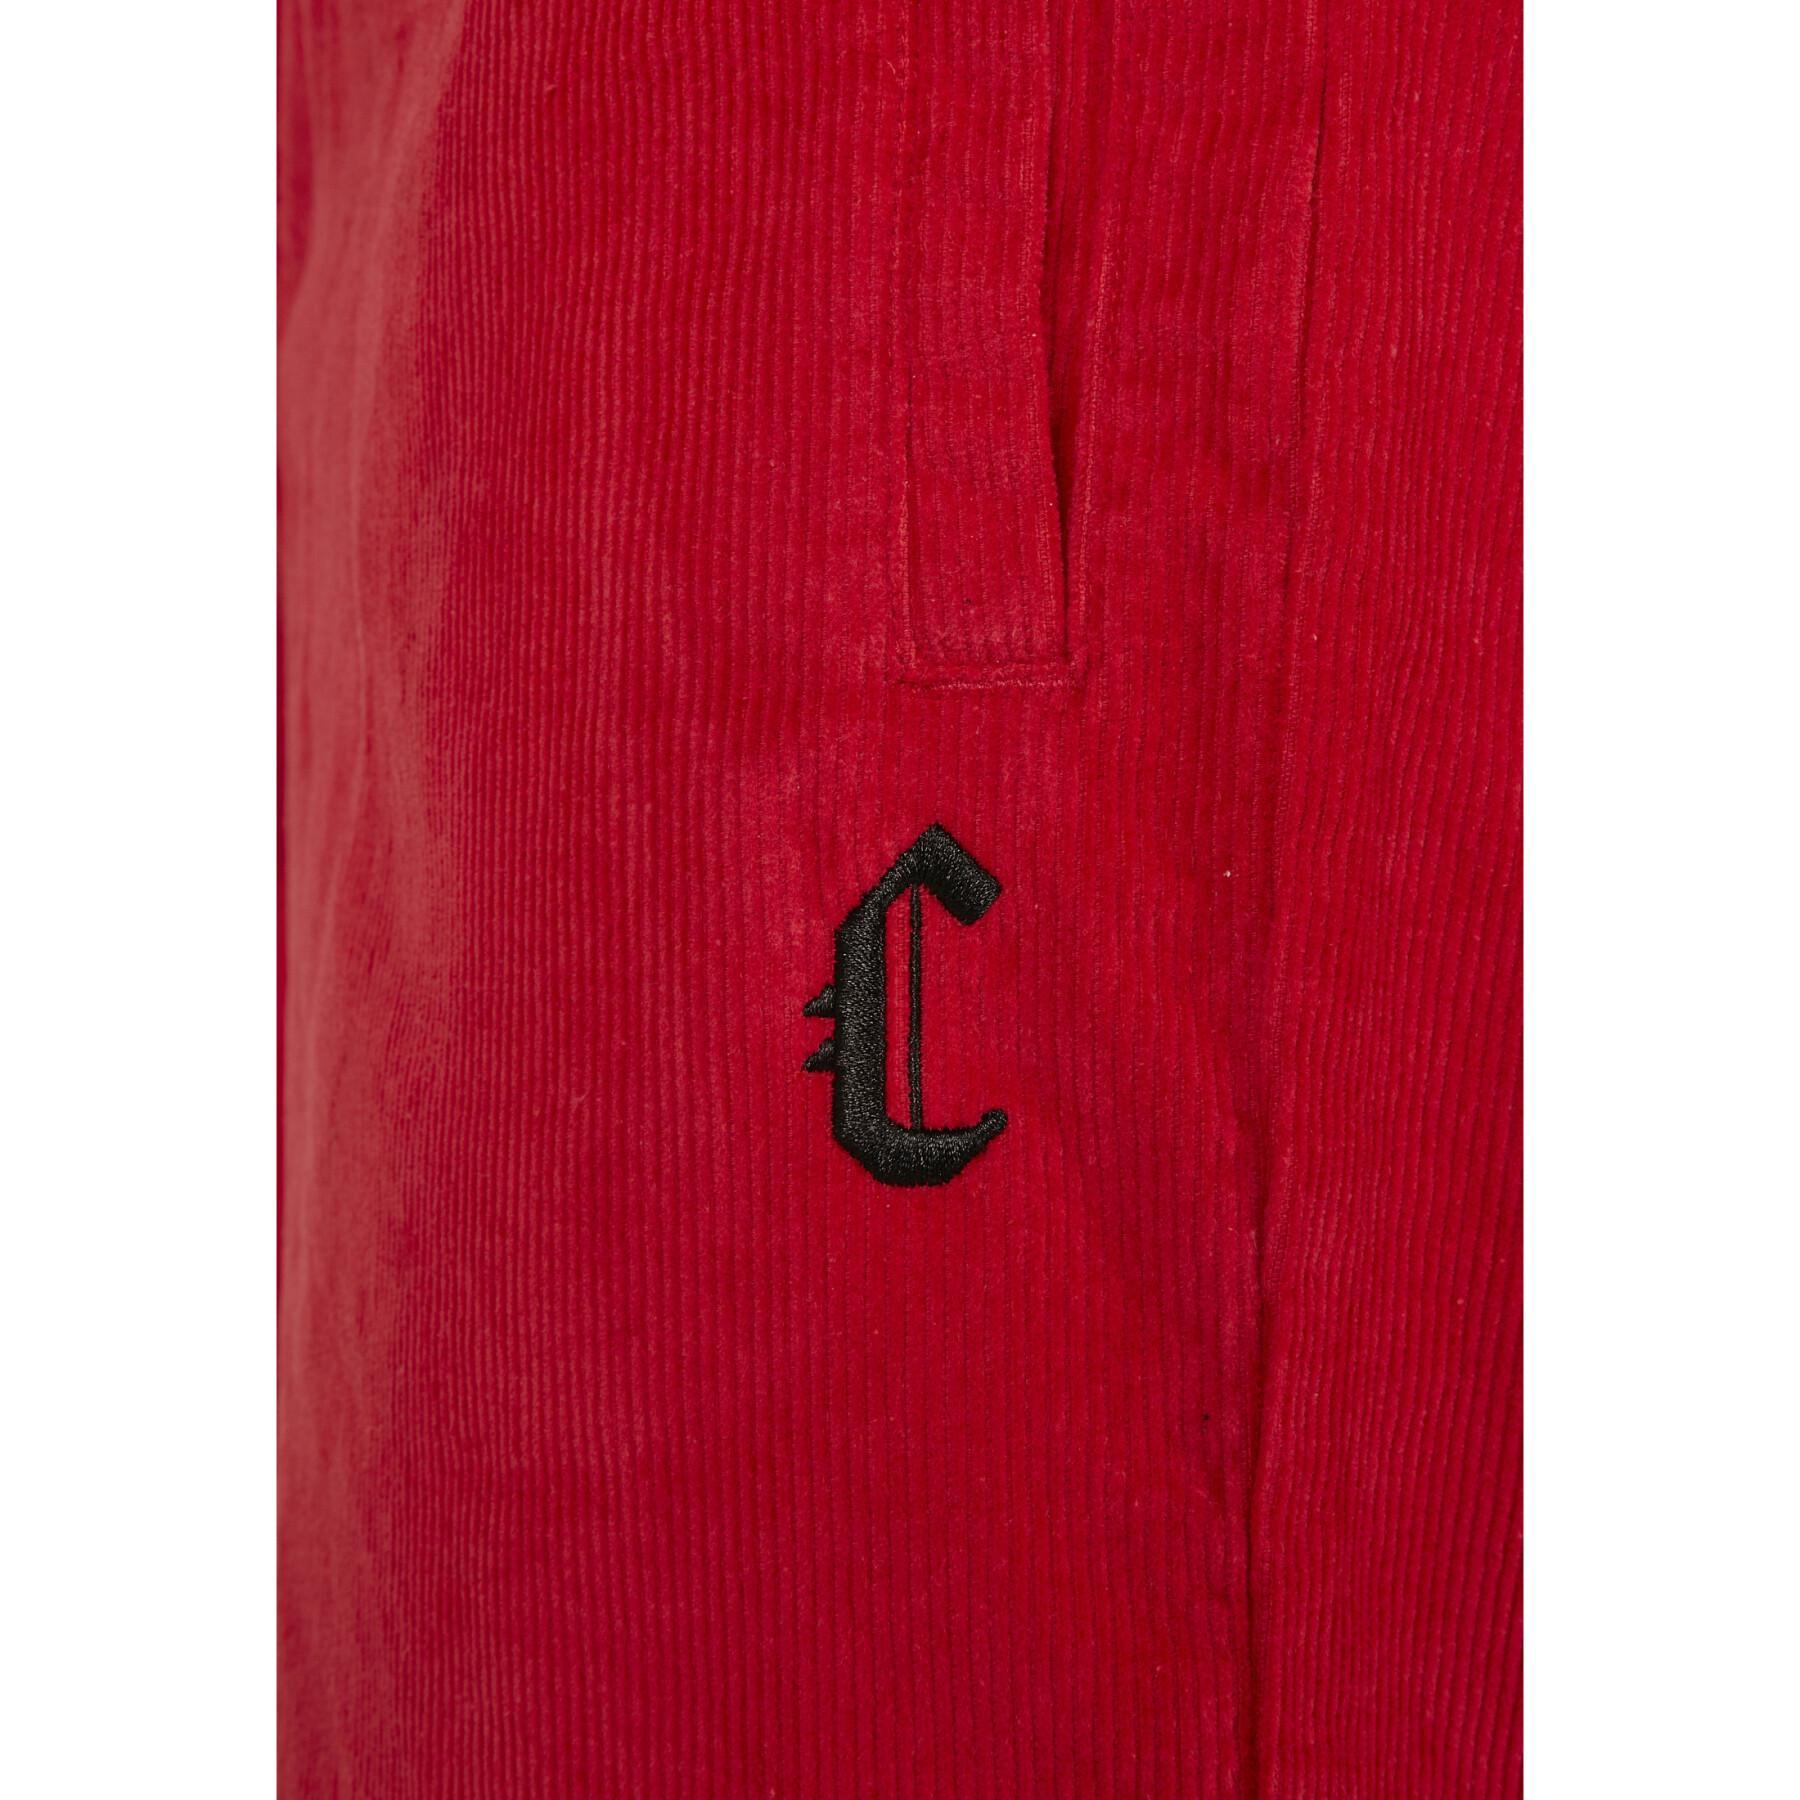 Shorts Cayler & Sons csbl reverse banned cord